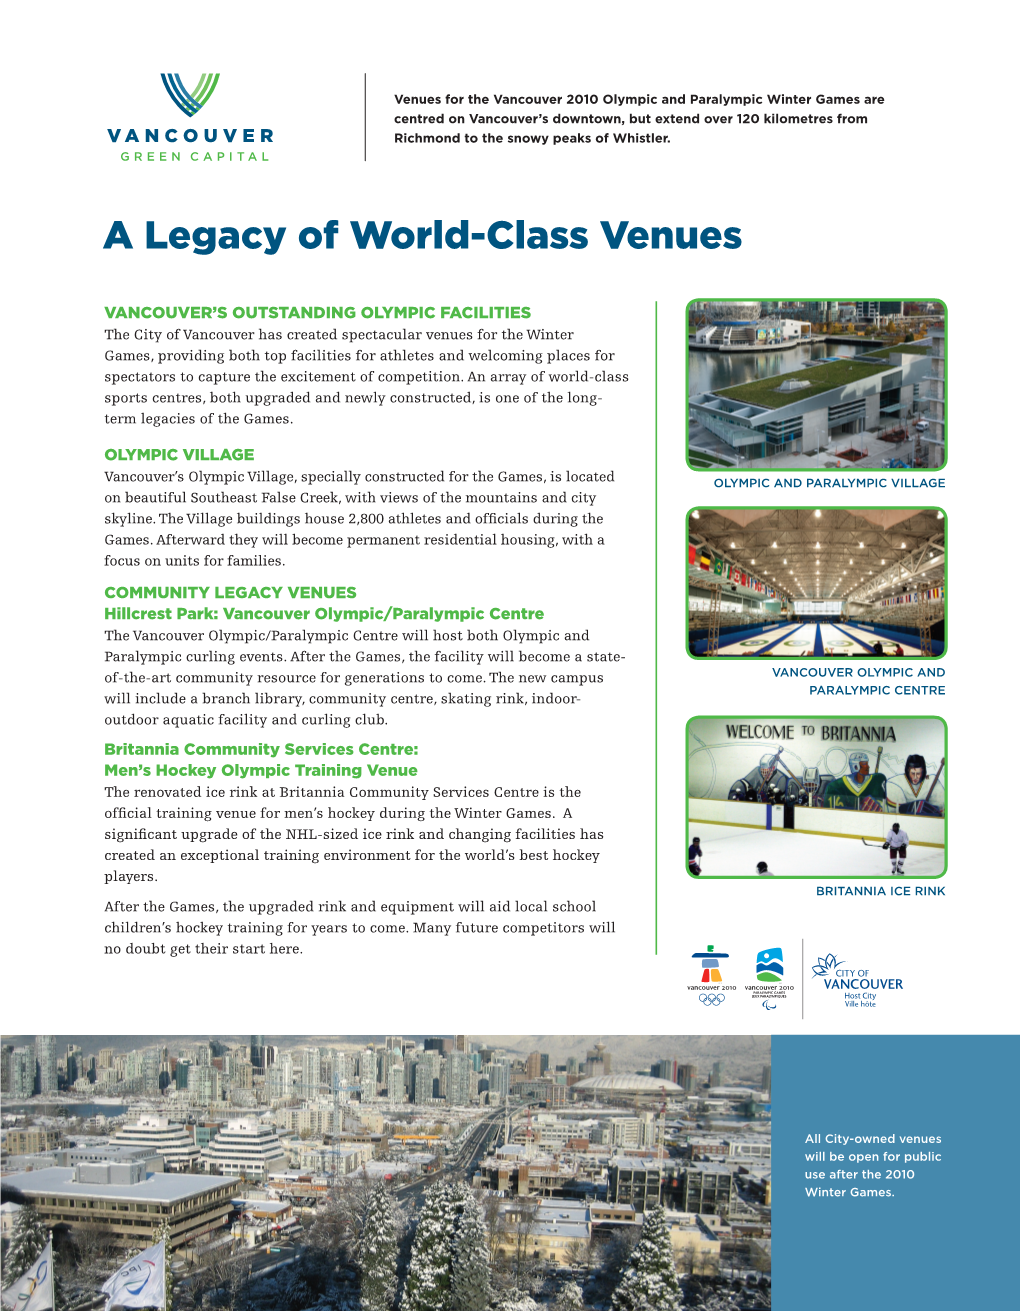 A Legacy of World-Class Venues